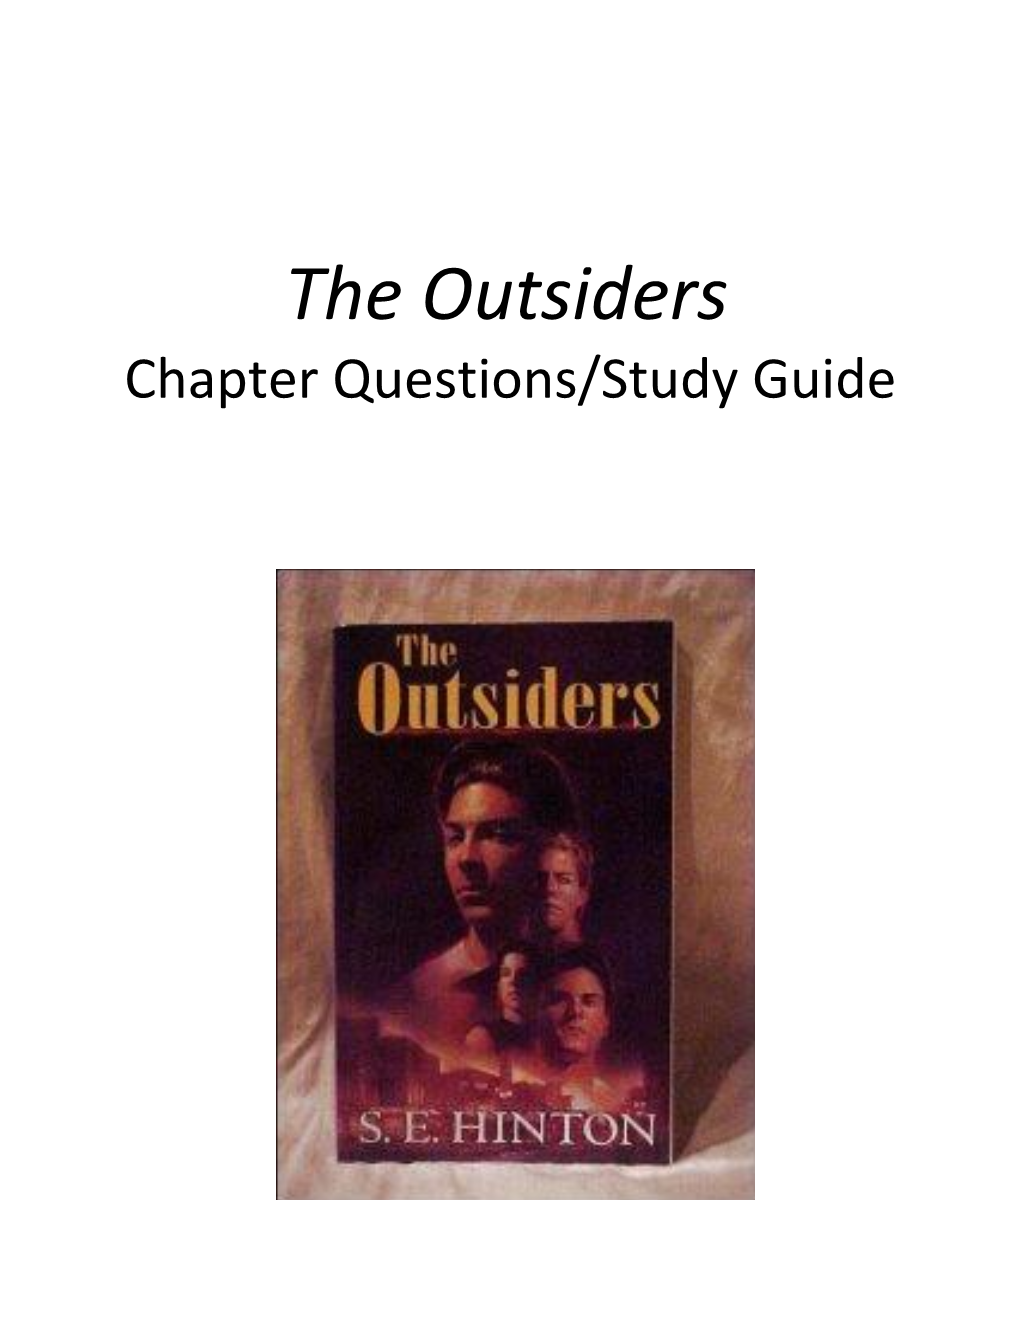 Chapter Questions/Study Guide